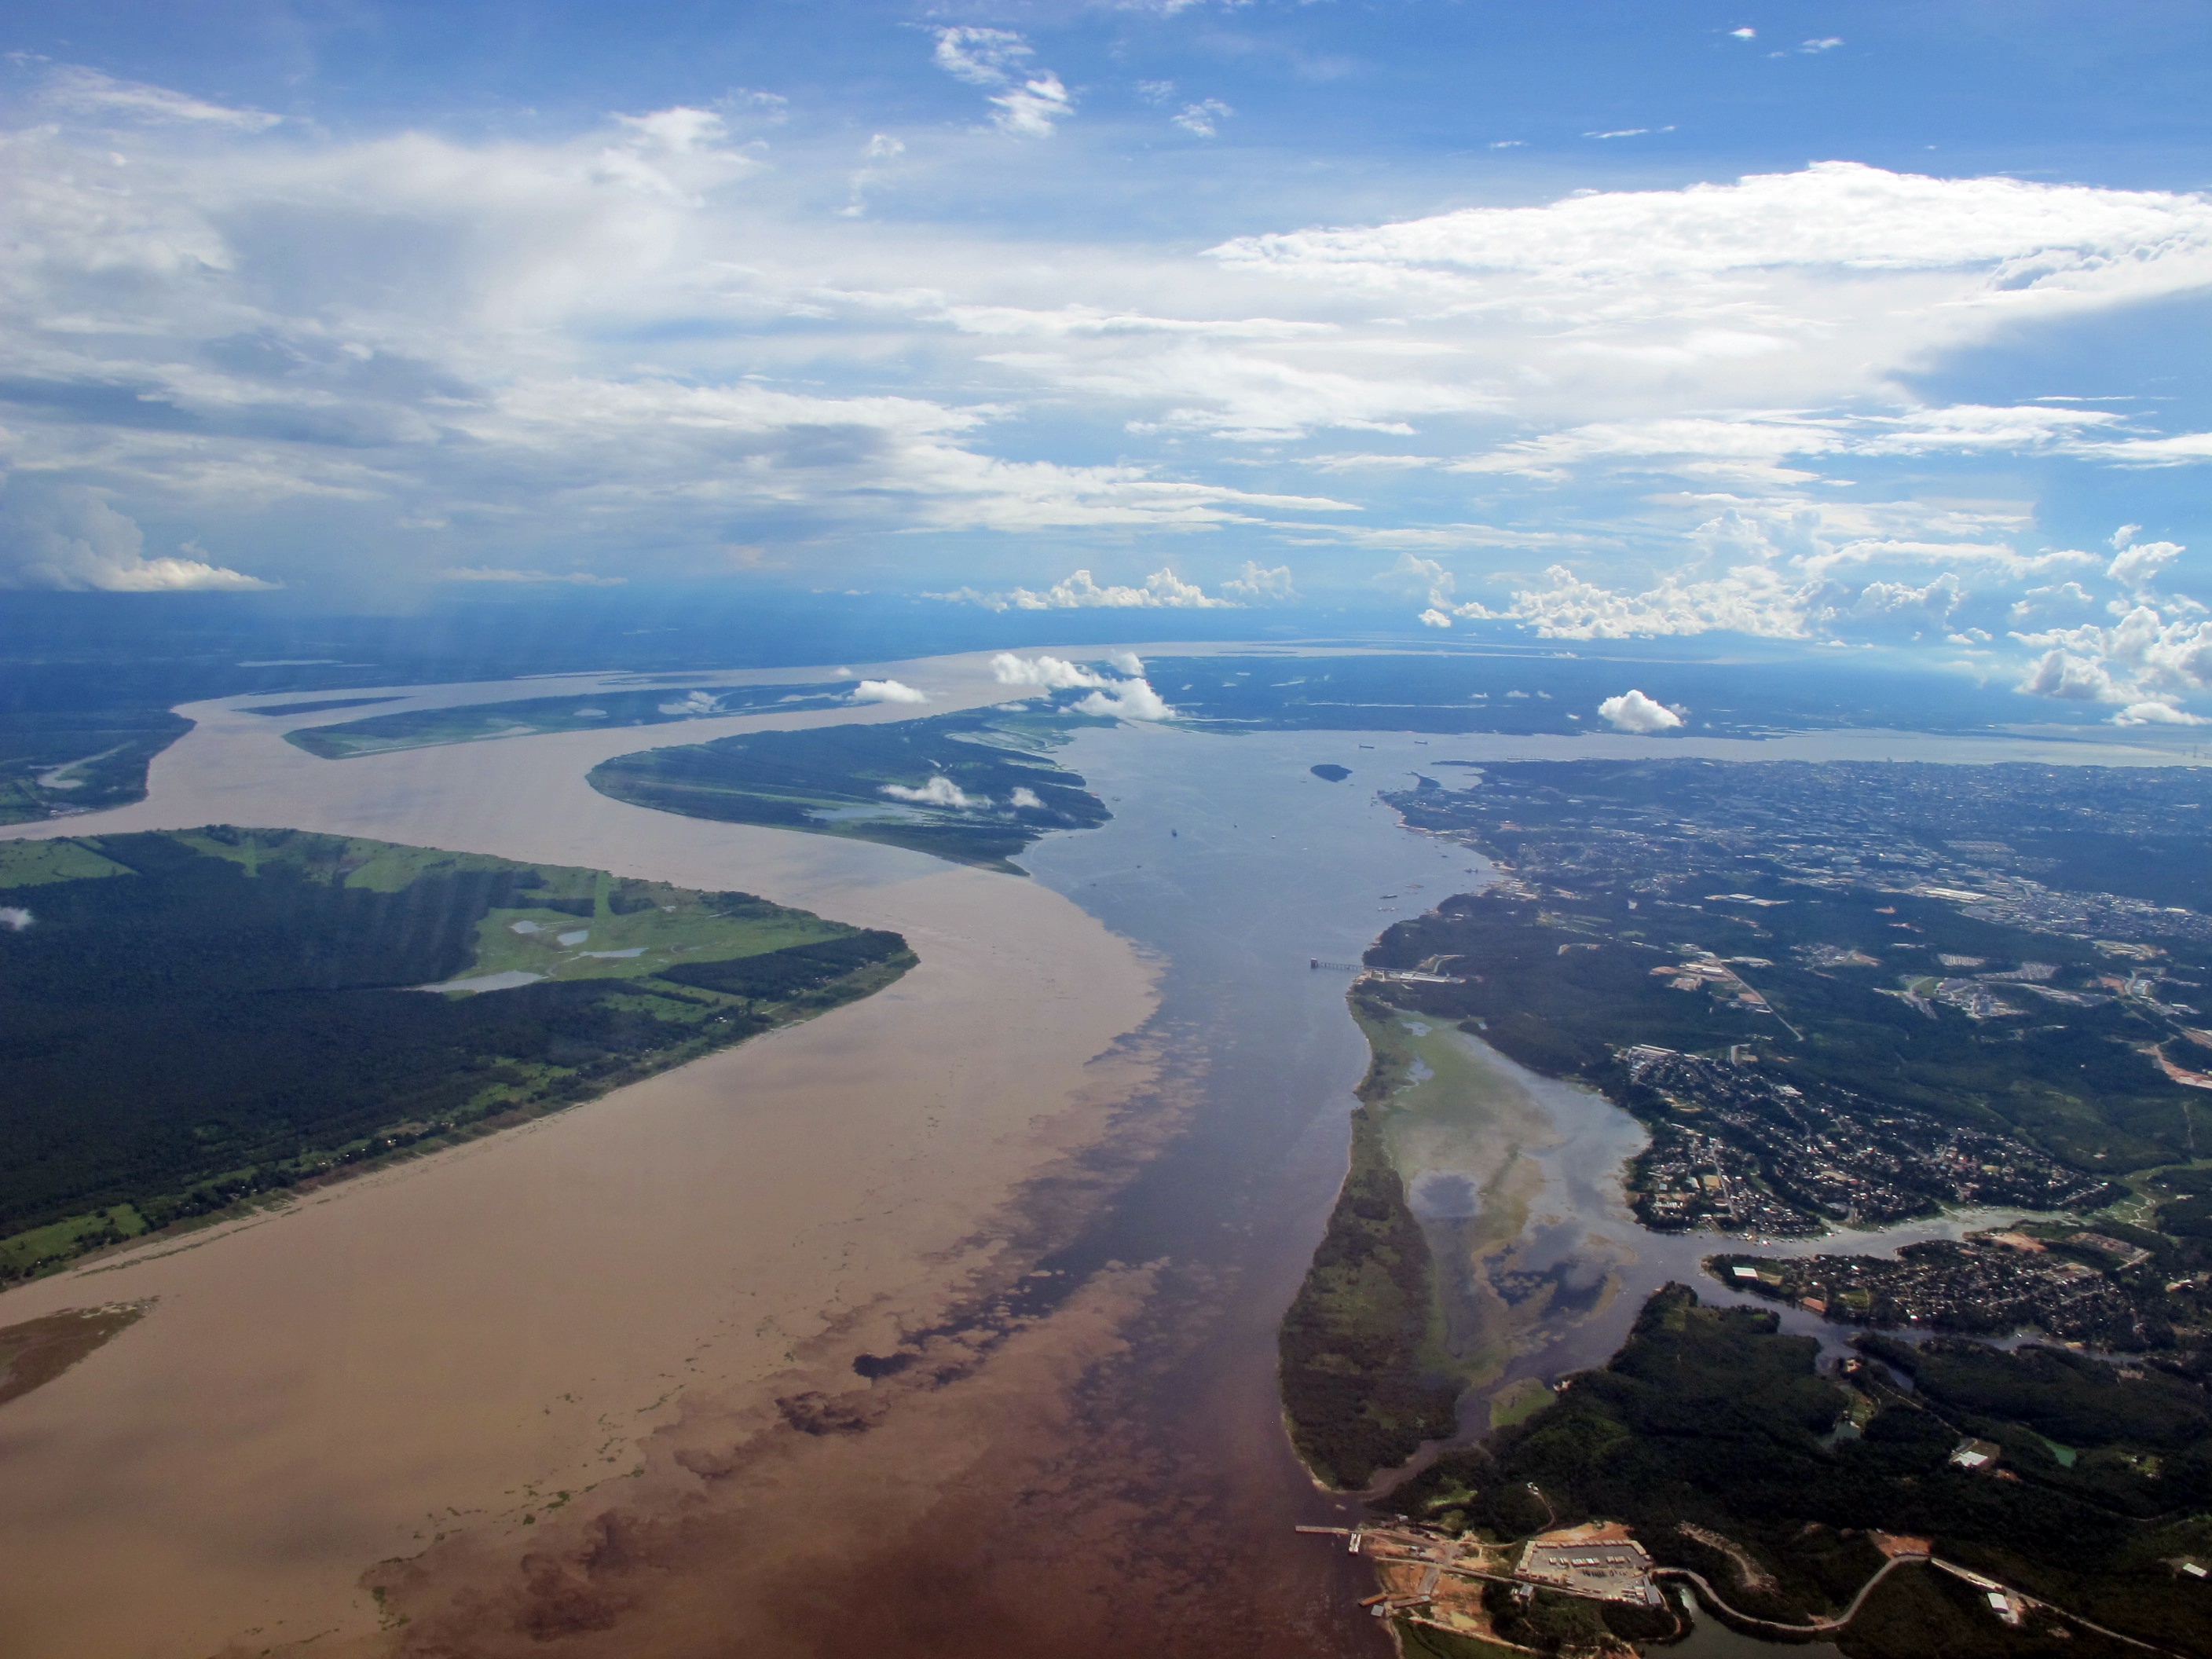 is the capital city of the state of Amazonas in the North Region of Brazil. It is situated near the confluence of the Negro and Solimões rivers.